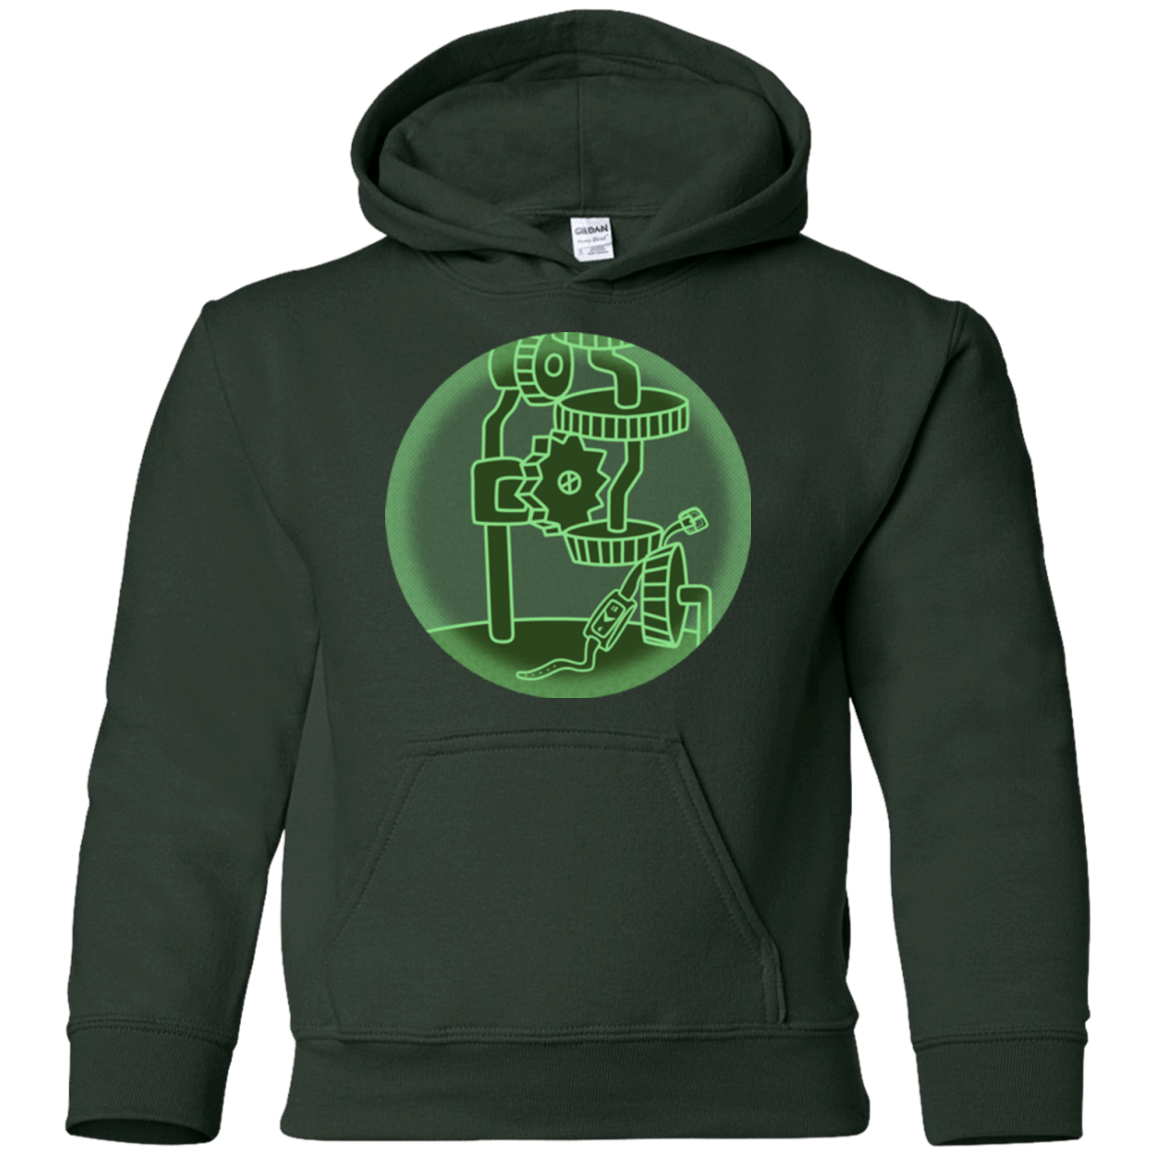 Sweatshirts Forest Green / YS Inside The Thief Youth Hoodie